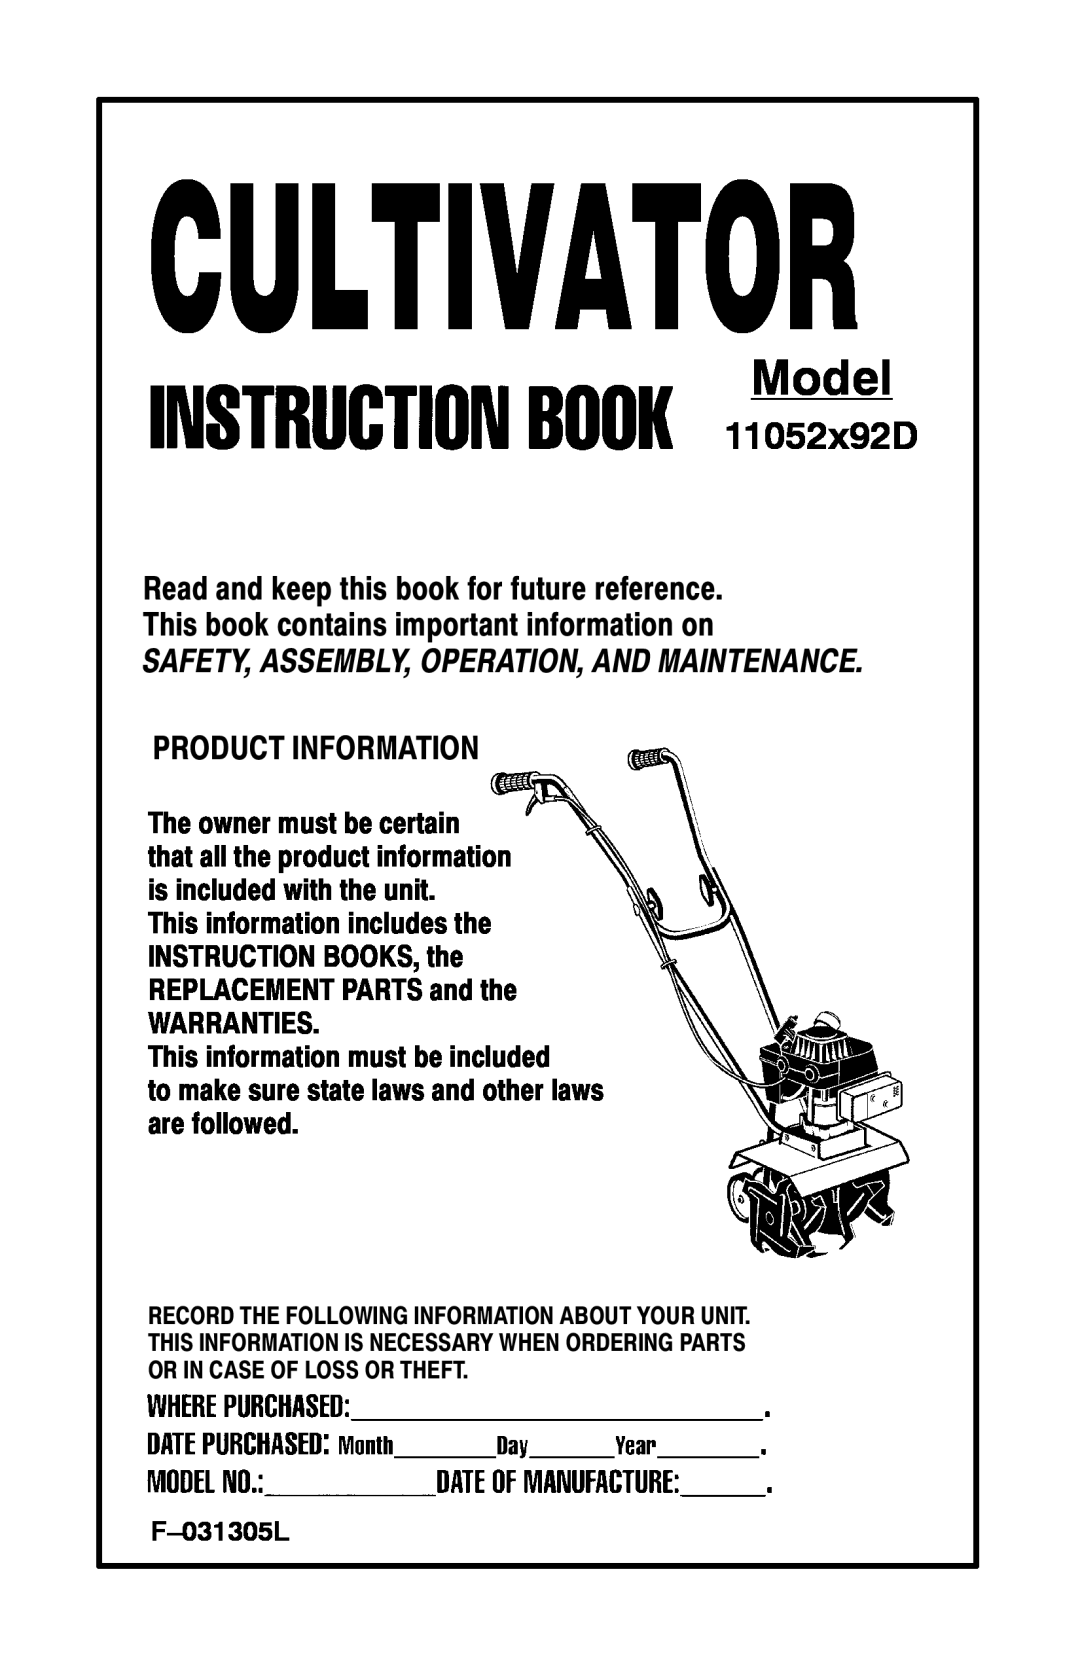 Murray 11052x92D manual Read and keep this book for future reference, This book contains important information on, Model 